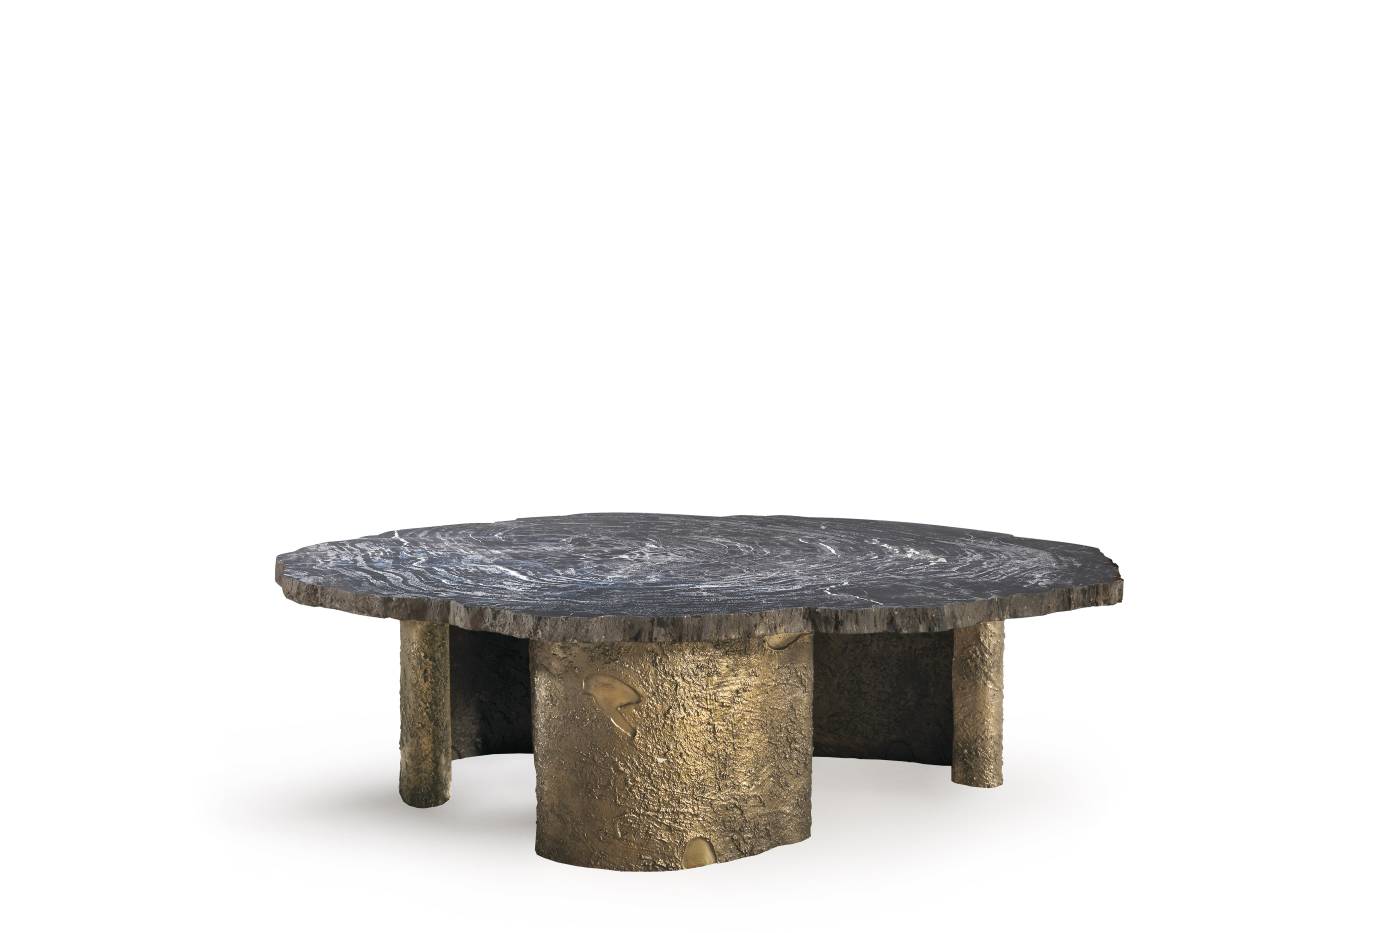 ECHO low table - A luxury experience with the Savoir-Faire collection and its classic luxurious furniture